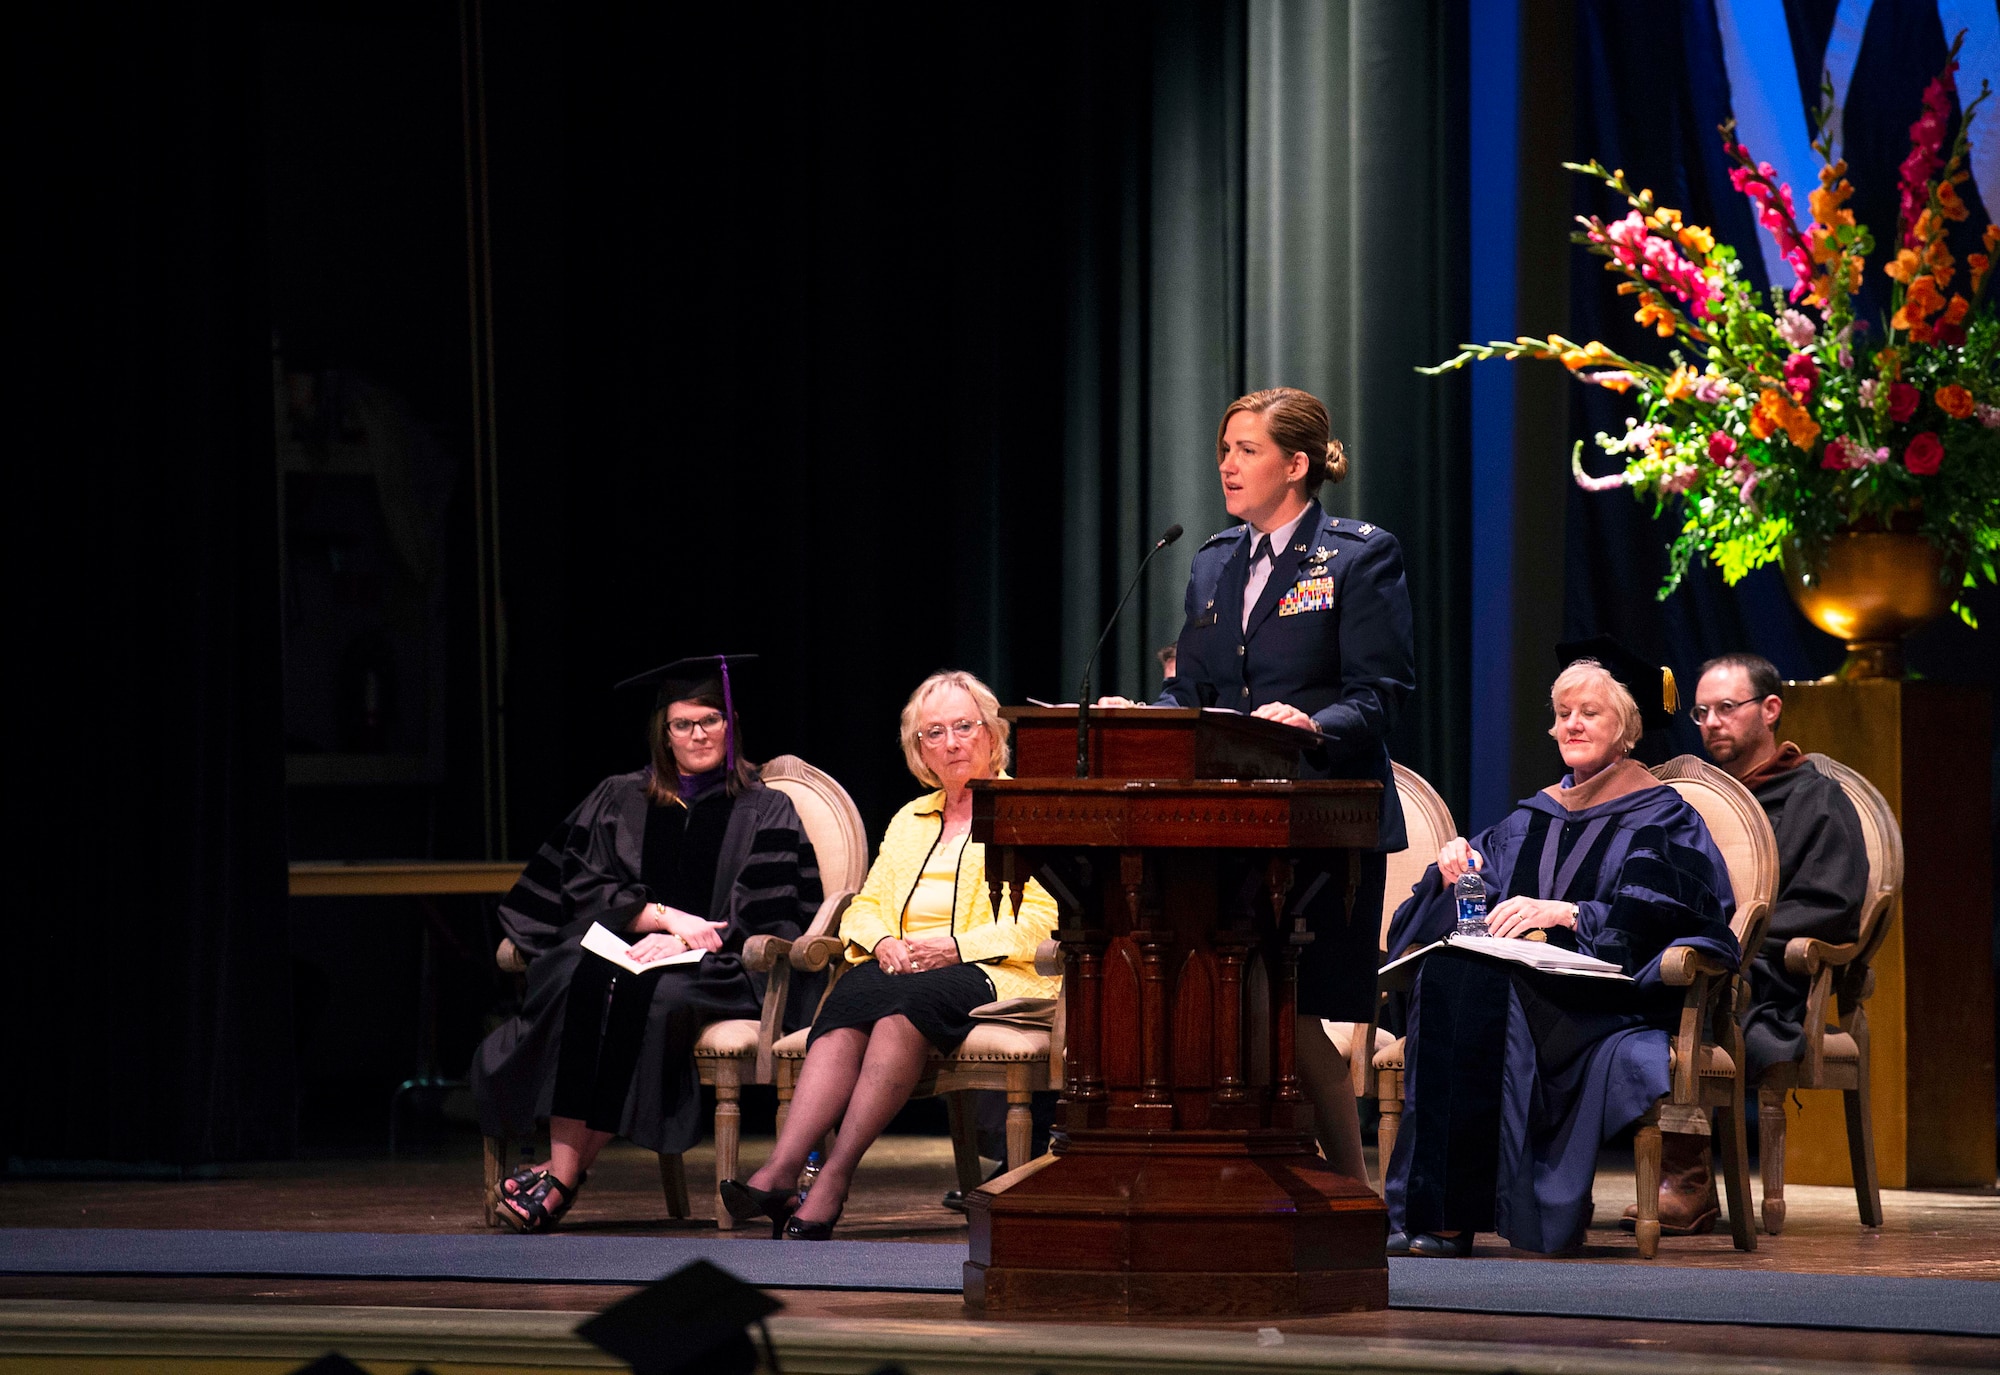 Col. Samantha Weeks, 14¬th Flying Training Wing commander, speaks at the Mississippi University for Women’s 134th commencement ceremony May 11, 2019, at the MUW Rent Auditorium in Columbus, Miss. Often referred to as graduation, the commencement ceremony is an end-of-spring semester celebration for students projected to successfully complete all of their graduation requirements by the end of the spring or summer semester of that year (U.S. Air Force photo by Airman Hannah Bean)